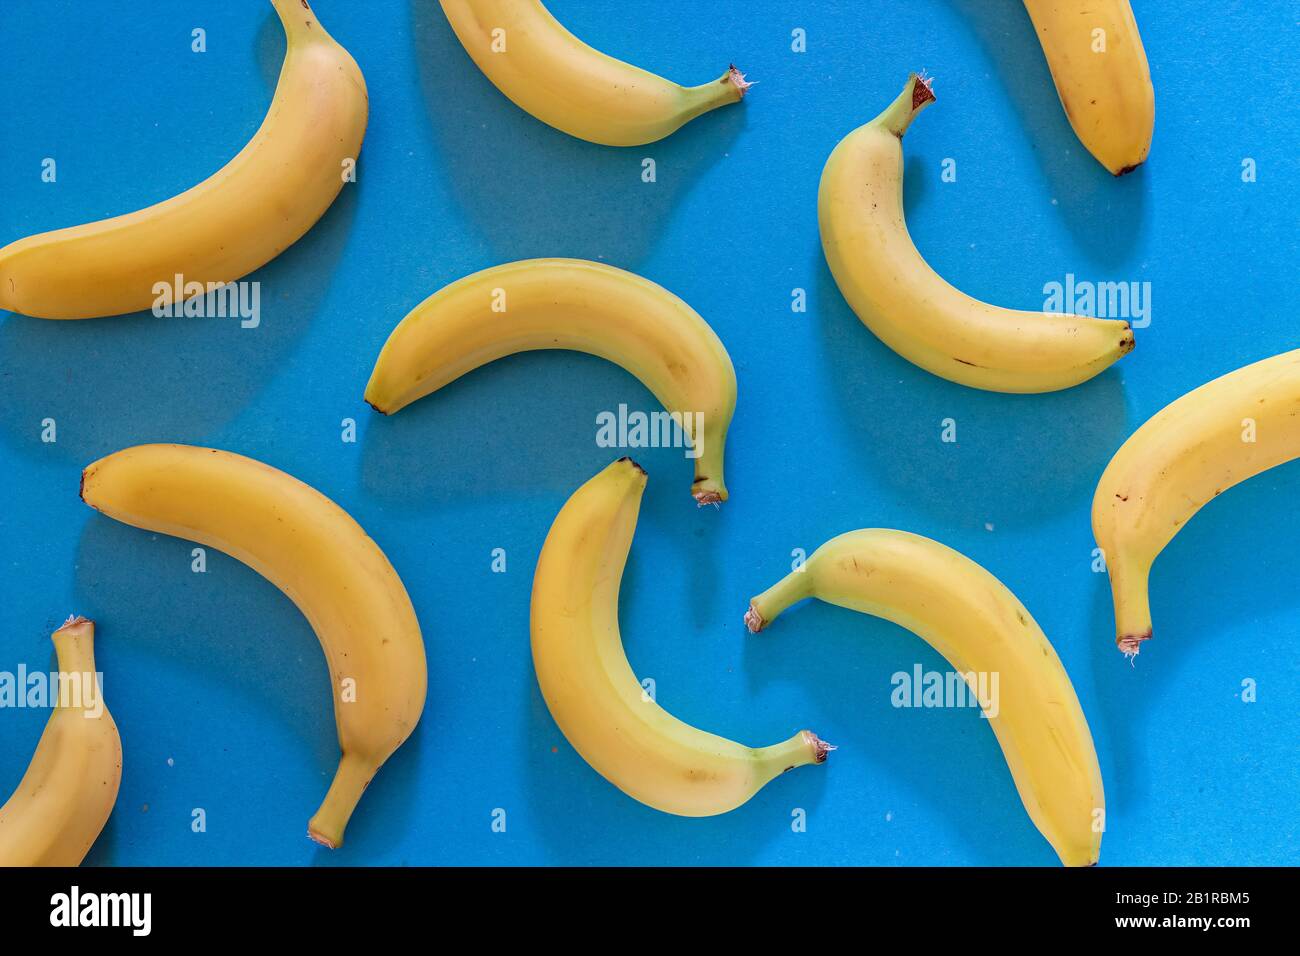 Colorful pattern with fresh bananas on blue background. Wallpaper Stock Photo